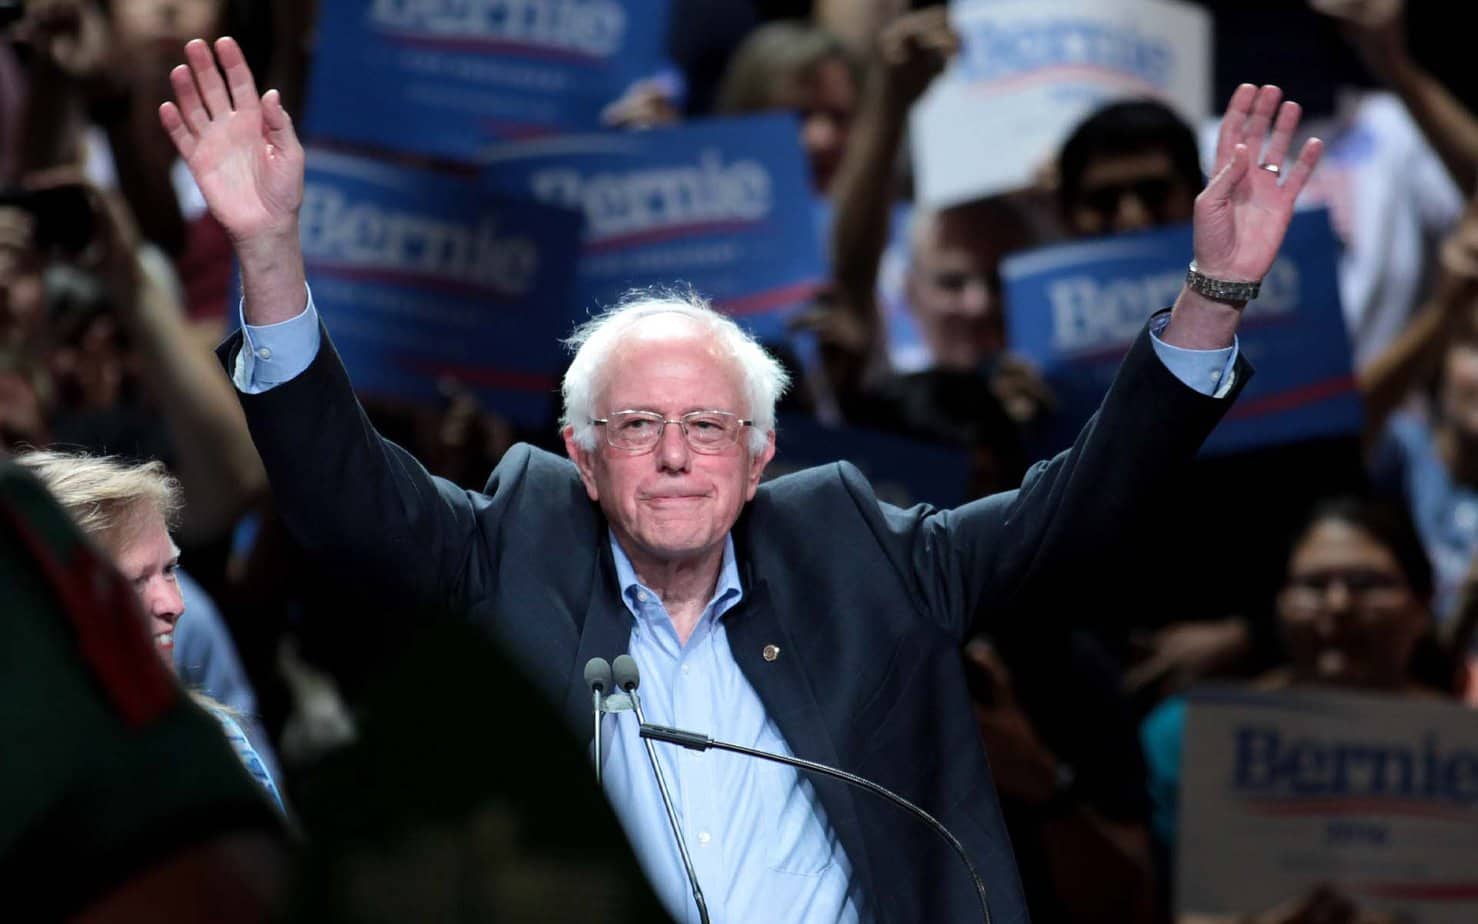 Sanders Drops out of Presidential Race, Paving Way for Biden's Nomination